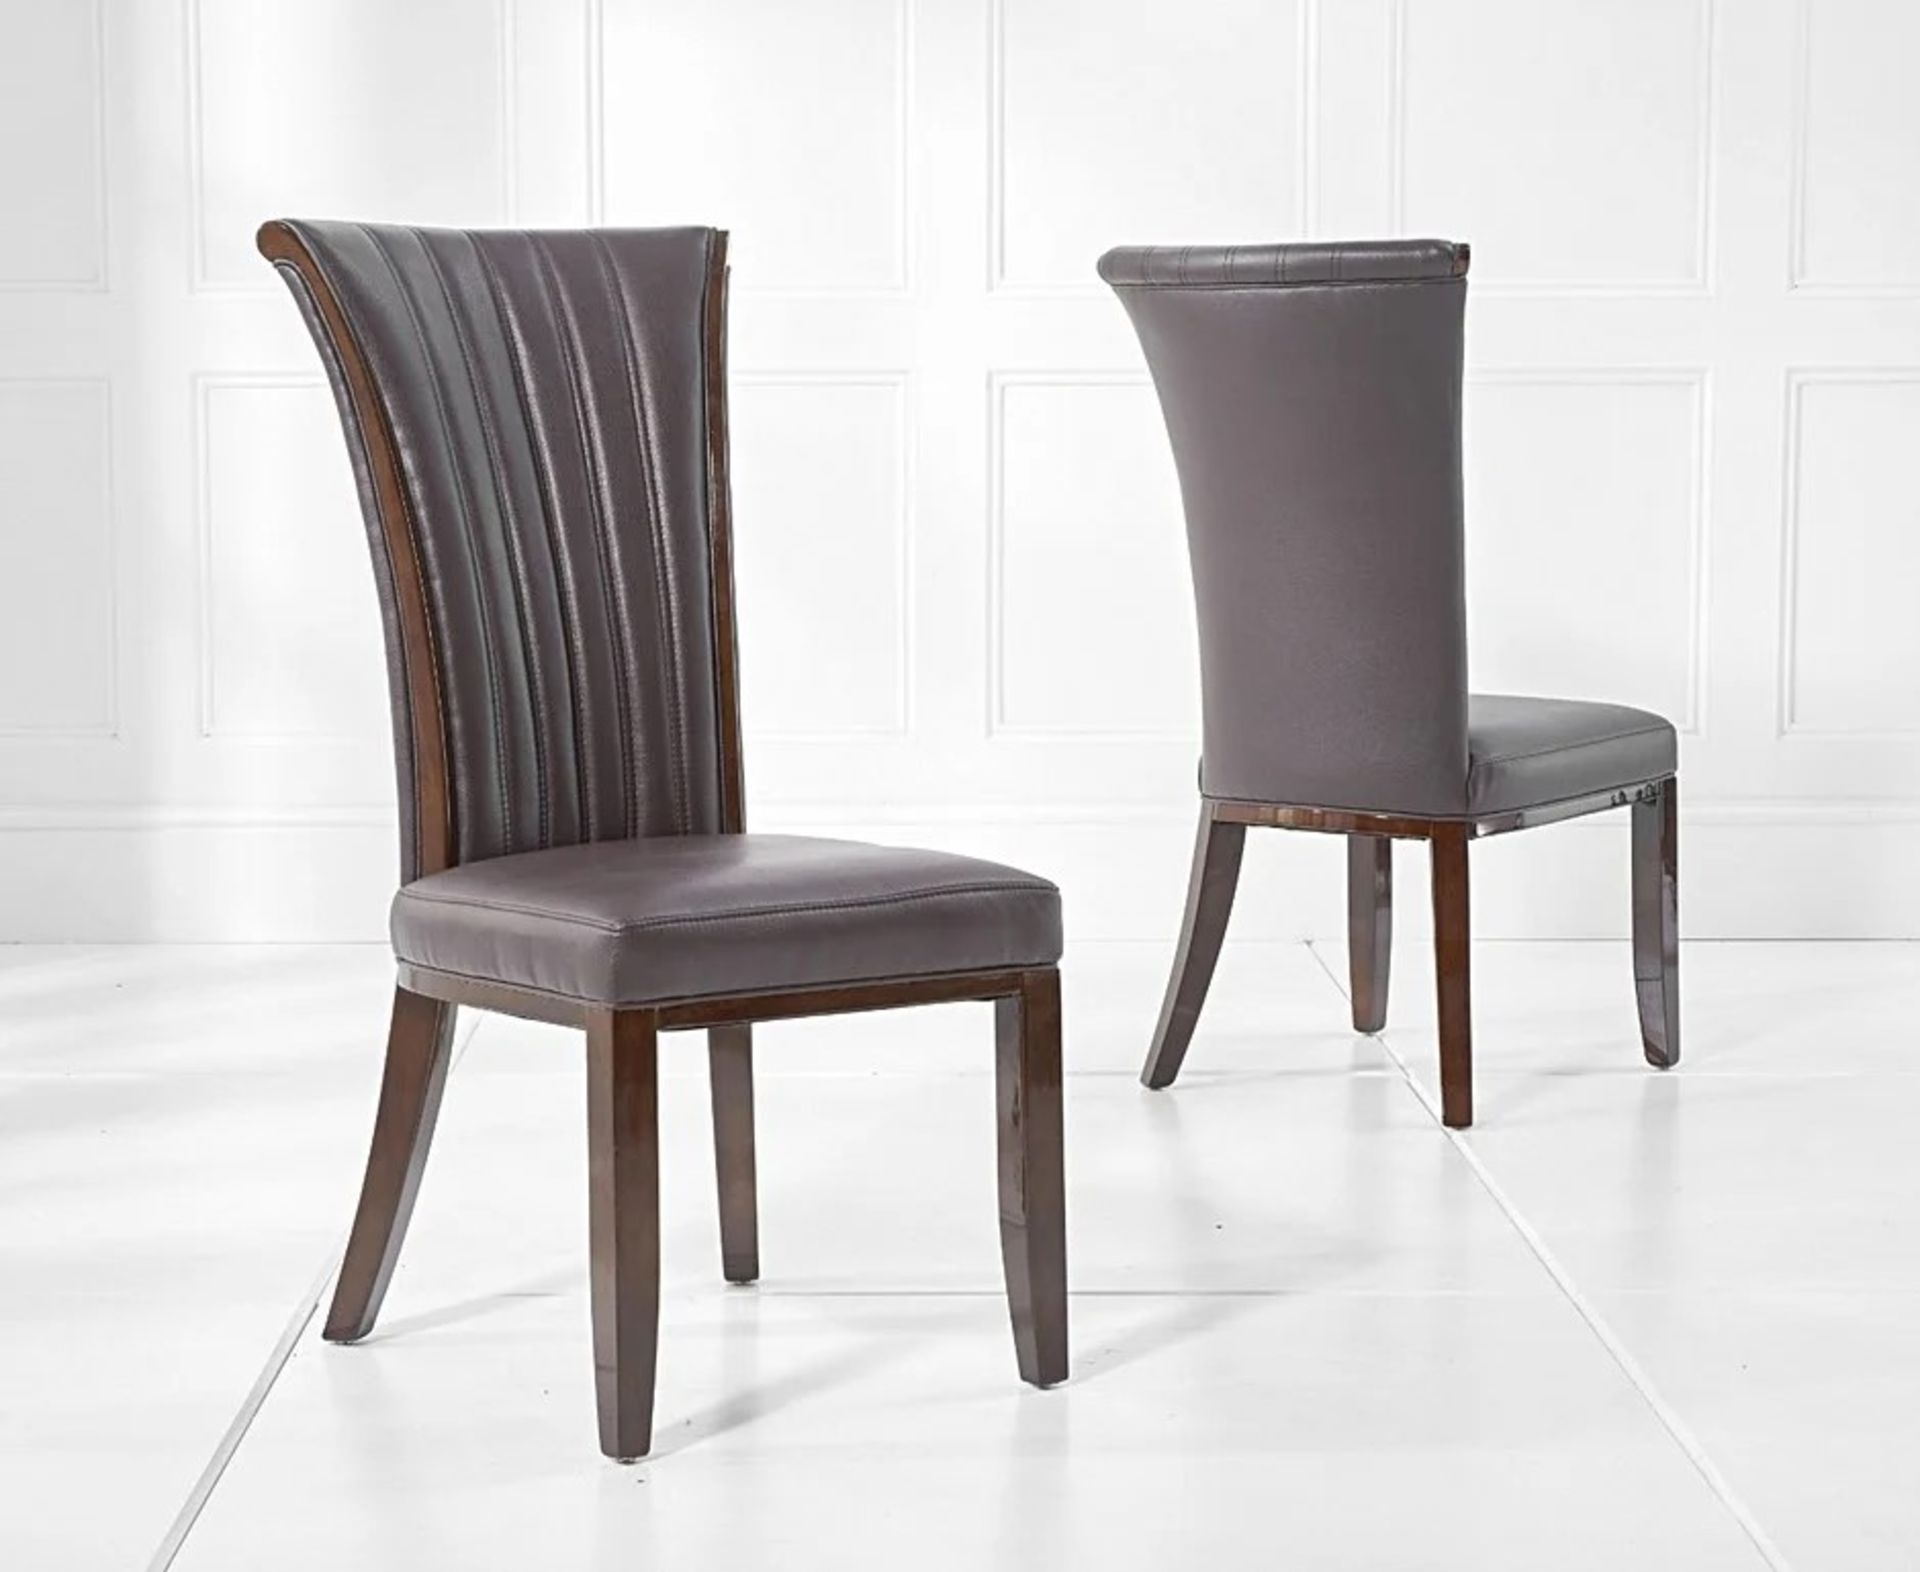 A set of 5 x Alpine Brown Leather Dining Chairs A sleek original design crafted from hardwood and